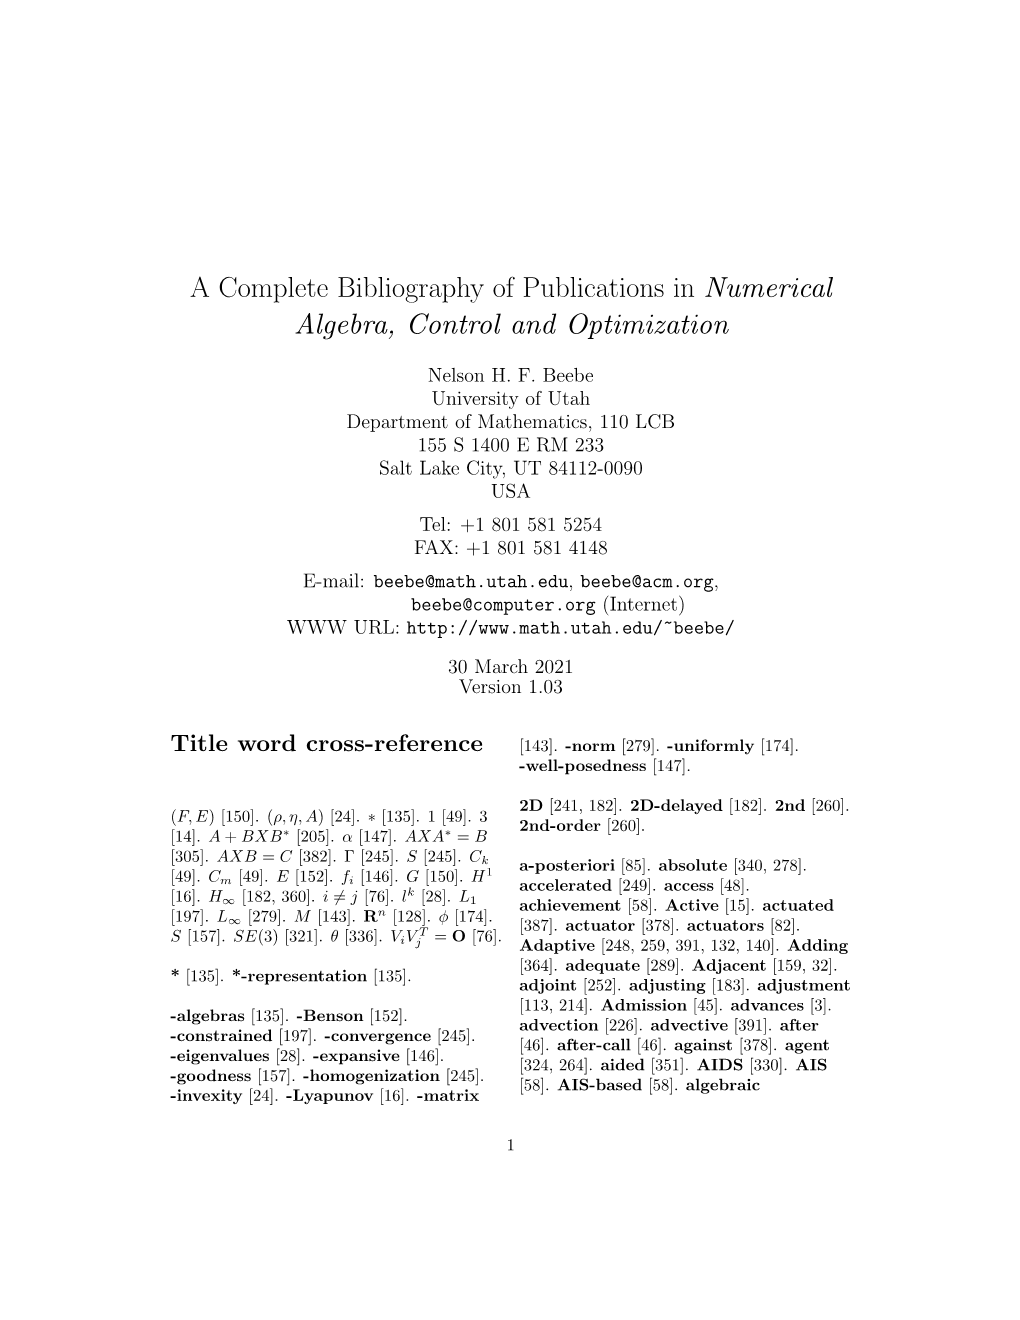 A Complete Bibliography of Publications in Numerical Algebra, Control and Optimization